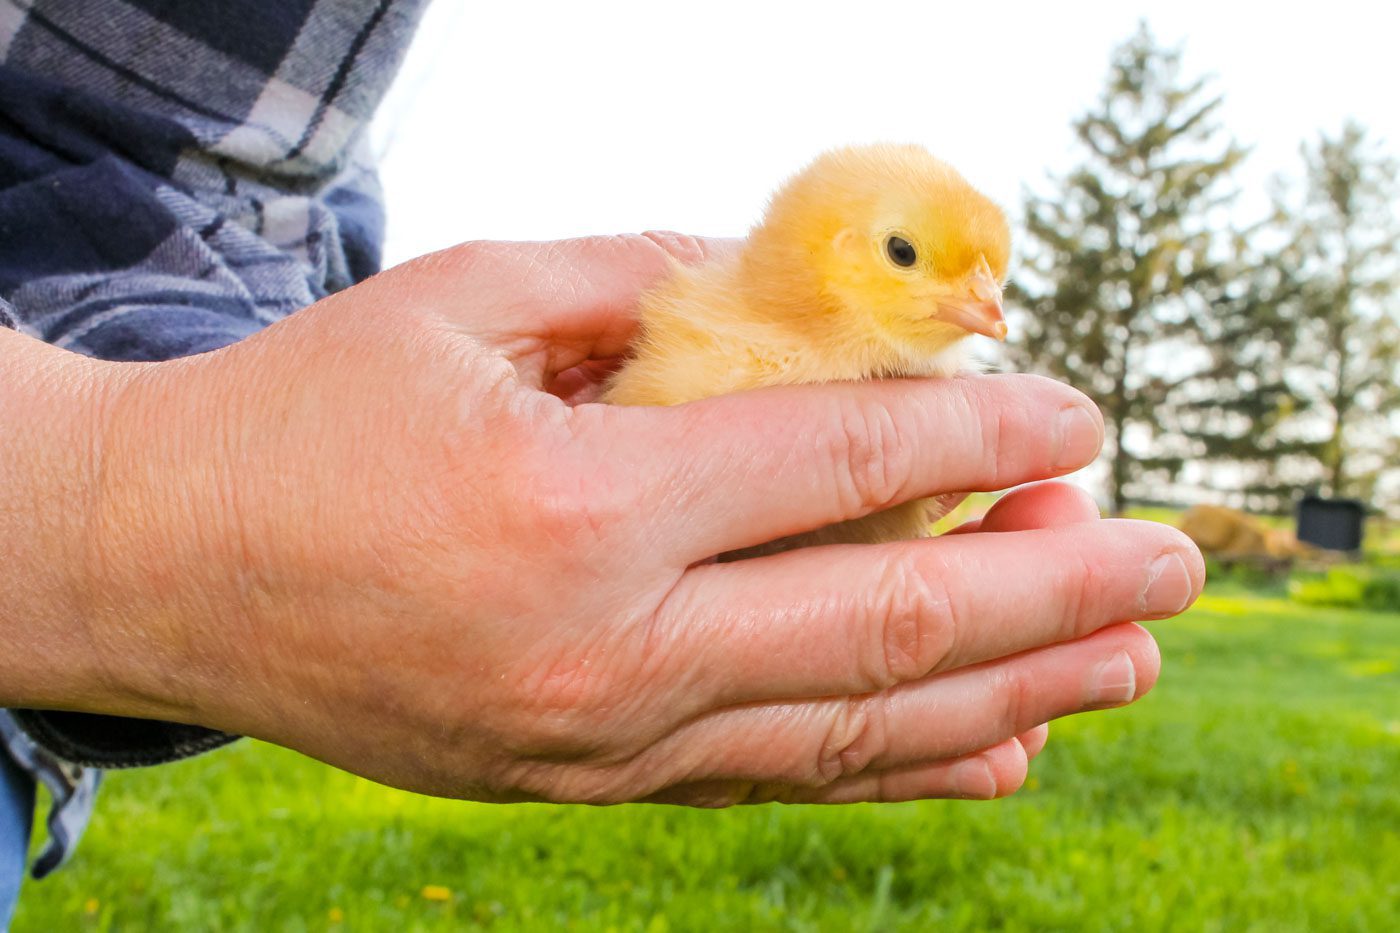 two hands are holding a baby chick